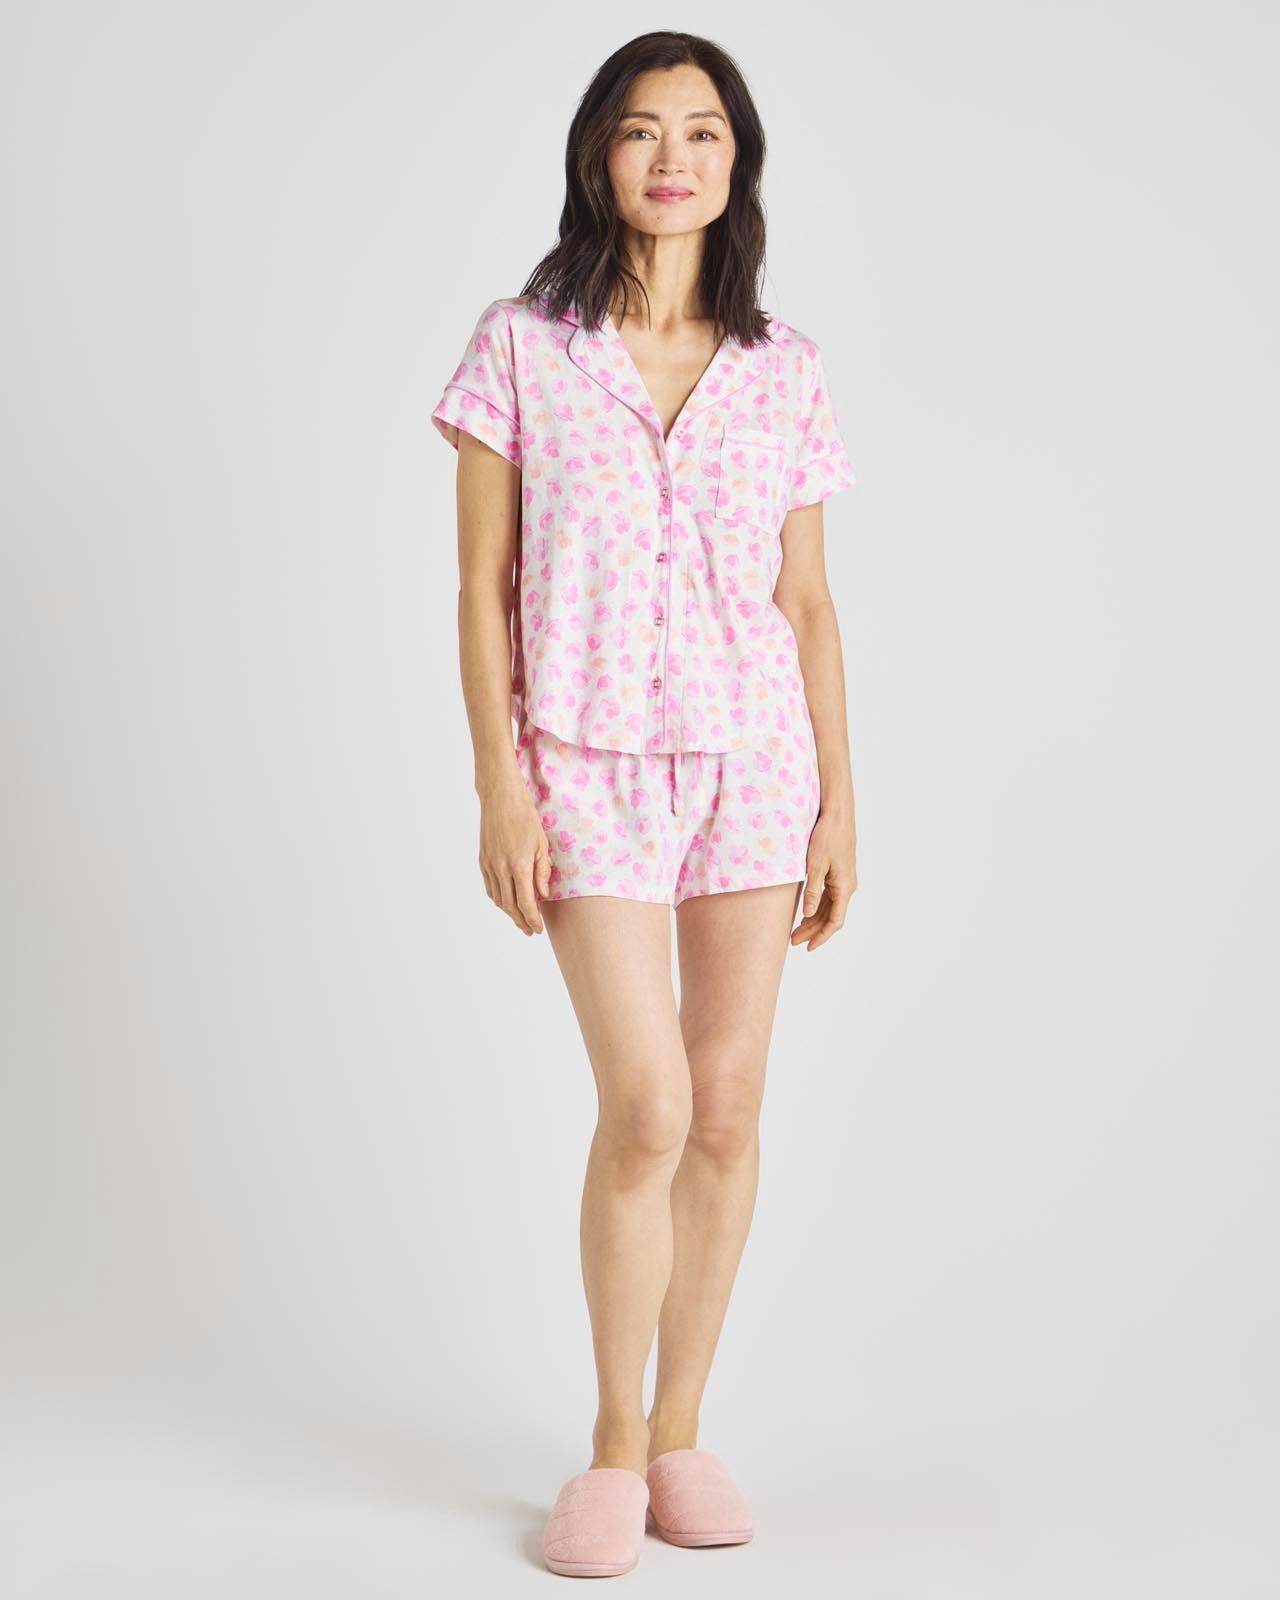  Sleep & Lounge: Clothing, Shoes & Accessories: Nightgowns &  Sleepshirts, Sets, Robes, Bottoms, Tops & More